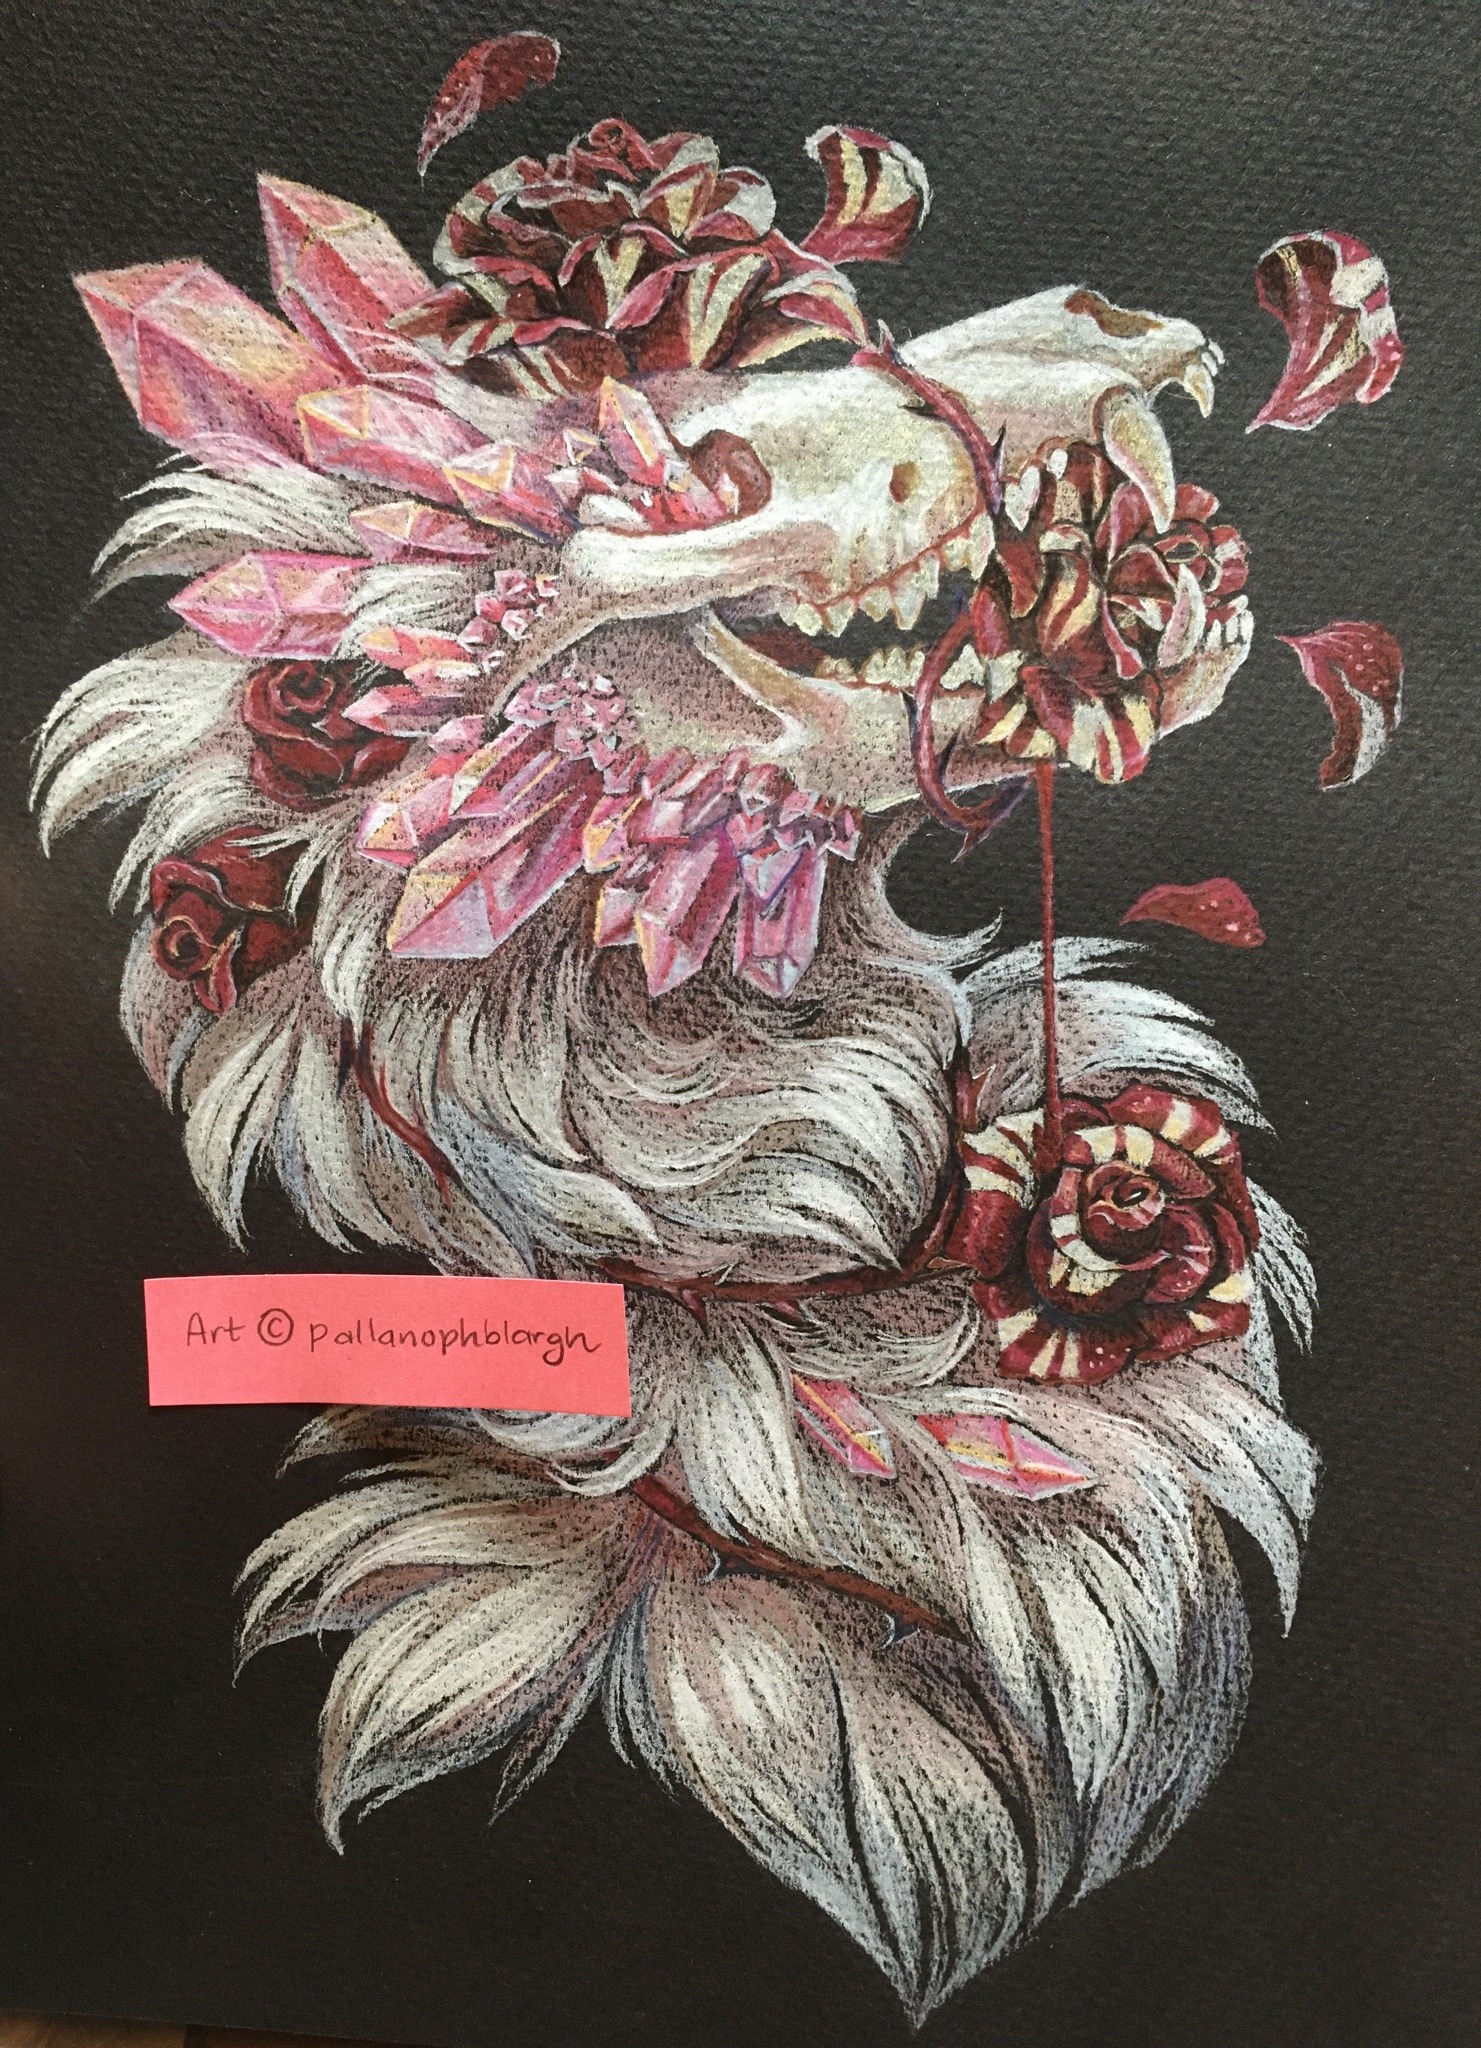 pallanophblargh:Another commission at rough finish stage! Caran d’Ache and Derwent colored pencils on black Fabriano tiziano paper. The trickiest part was definitely those roses and crystals, but I think they turned out pretty well!For commissioner’s